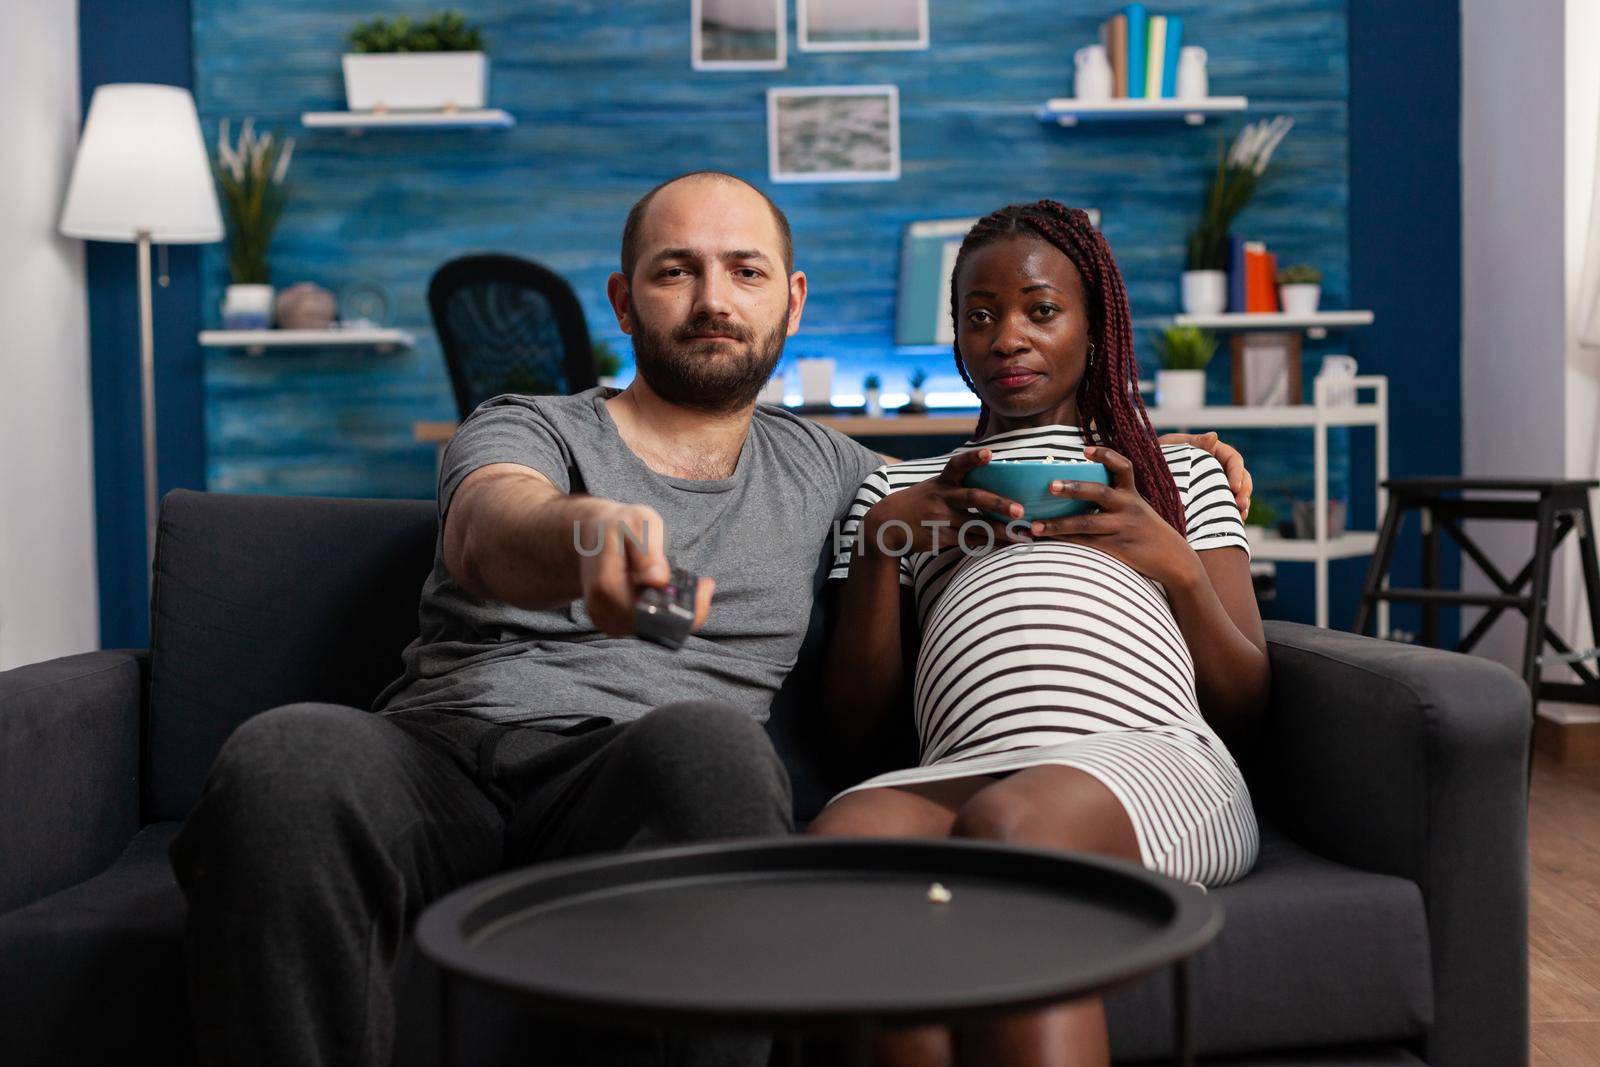 Pregnant interracial couple looking at camera watching television on sofa. POV of mixed race partners with pregnancy relaxing while eating popcorn and using TV remote control.